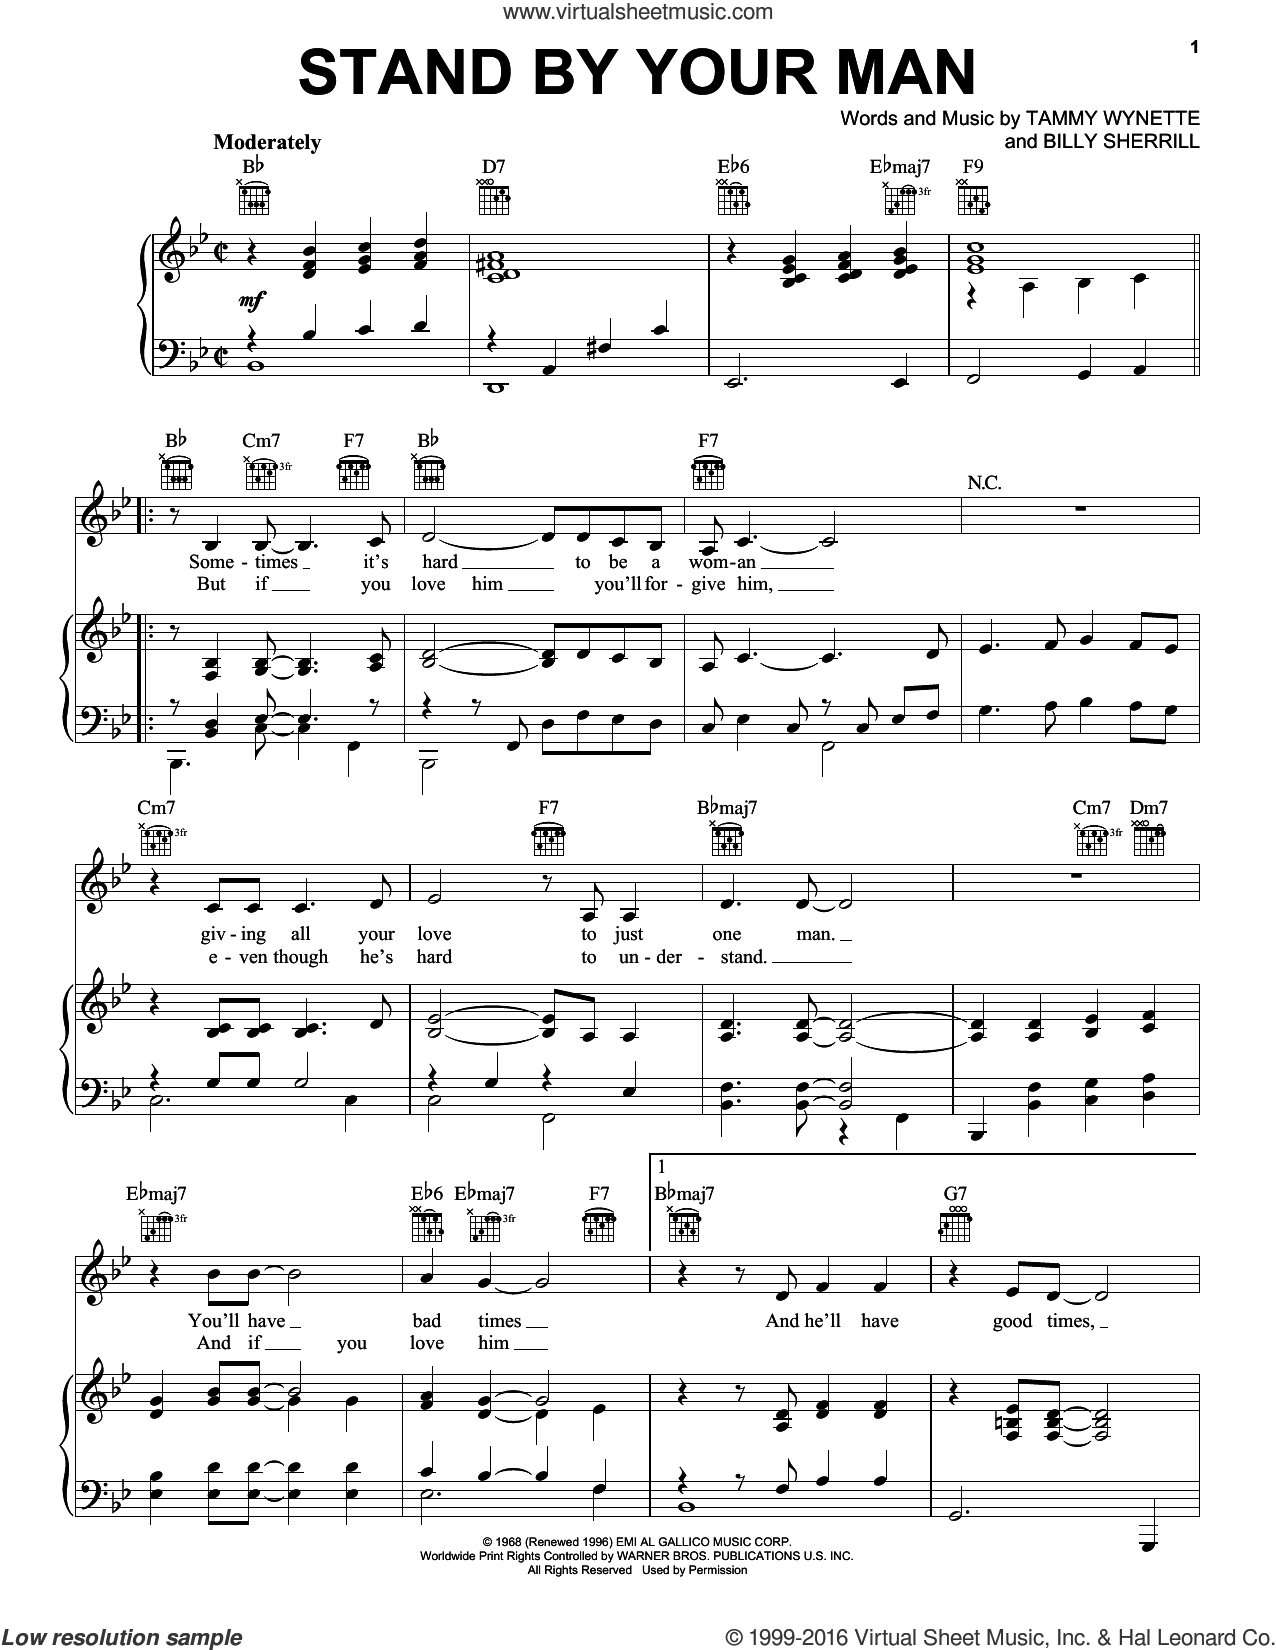 Piano Man Chords Lovett Stand Your Man Sheet Music For Voice Piano Or Guitar